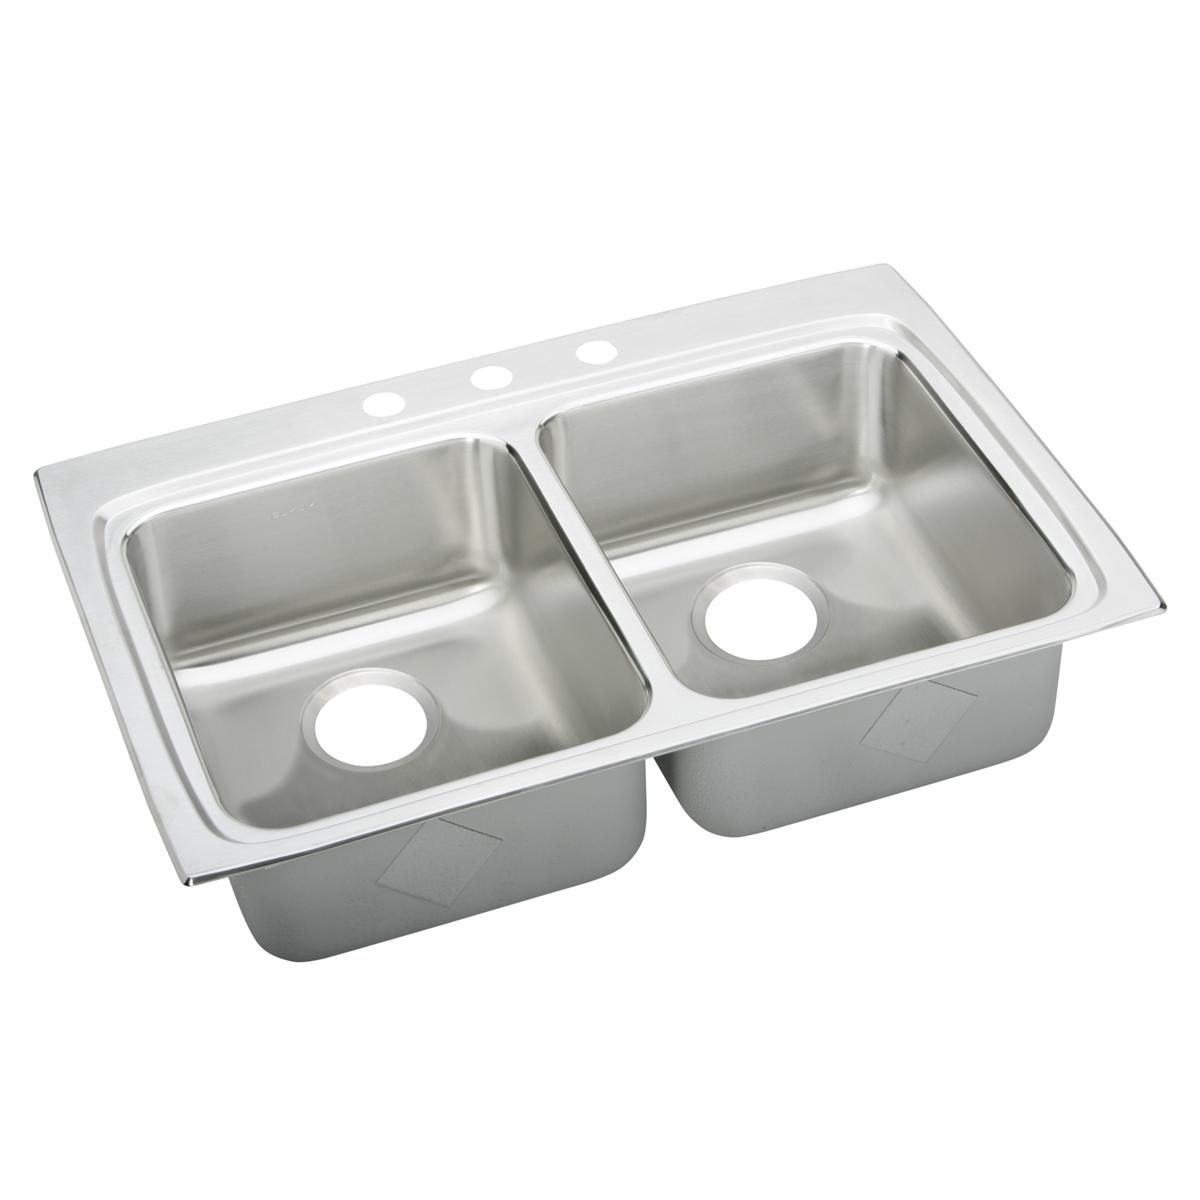 Elkay Lustertone Classic 33" x 22" x 5" MR2-Hole Equal Double Bowl Drop-in ADA Sink with Quick-clip